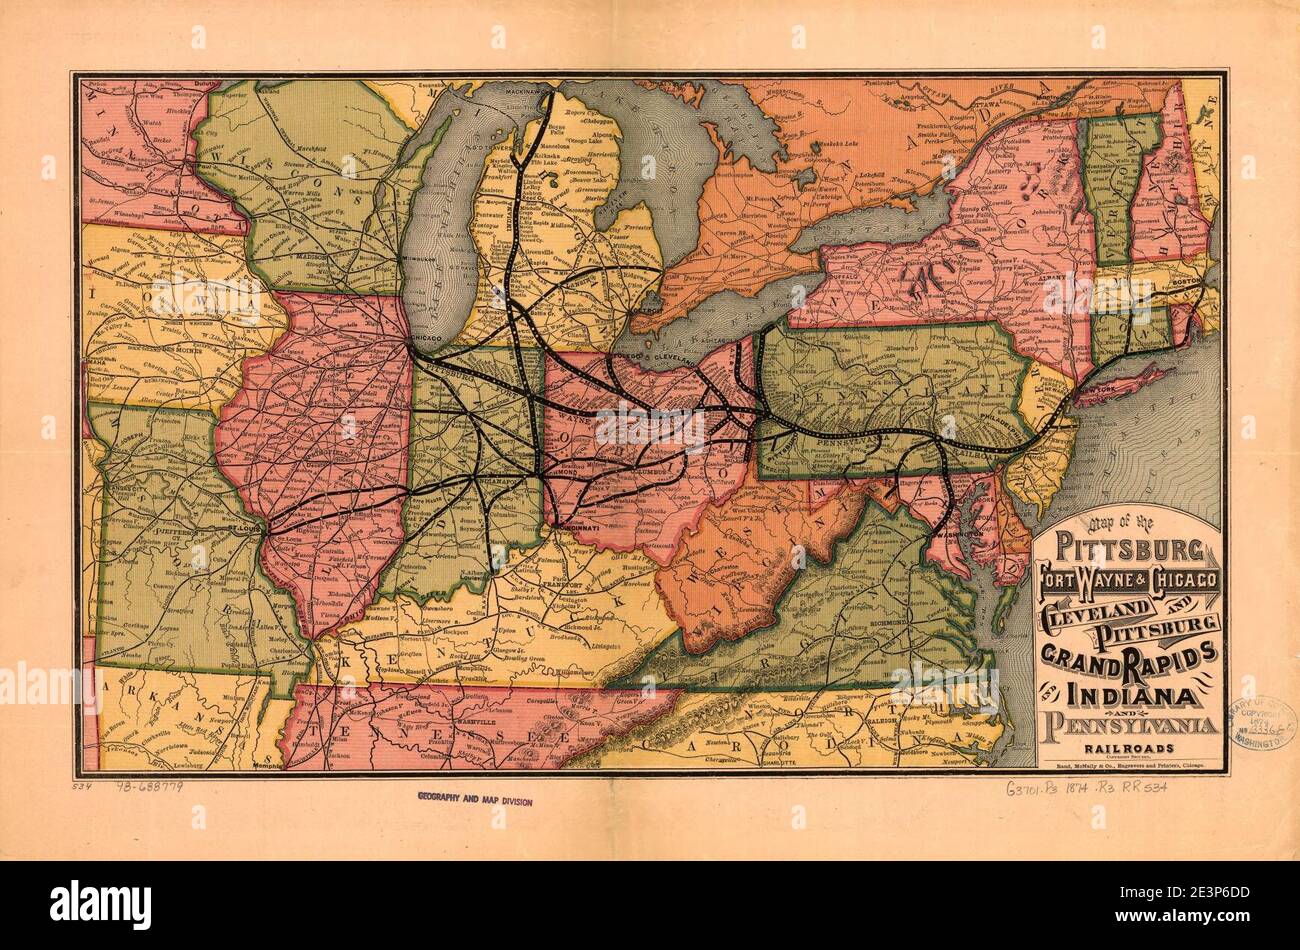 Map of the Pittsburg (sic), Fort Wayne & Chicago, Cleveland and Pittsburg (sic), Grand Rapids and Indiana, and Pennsylvania railroads. Stock Photo